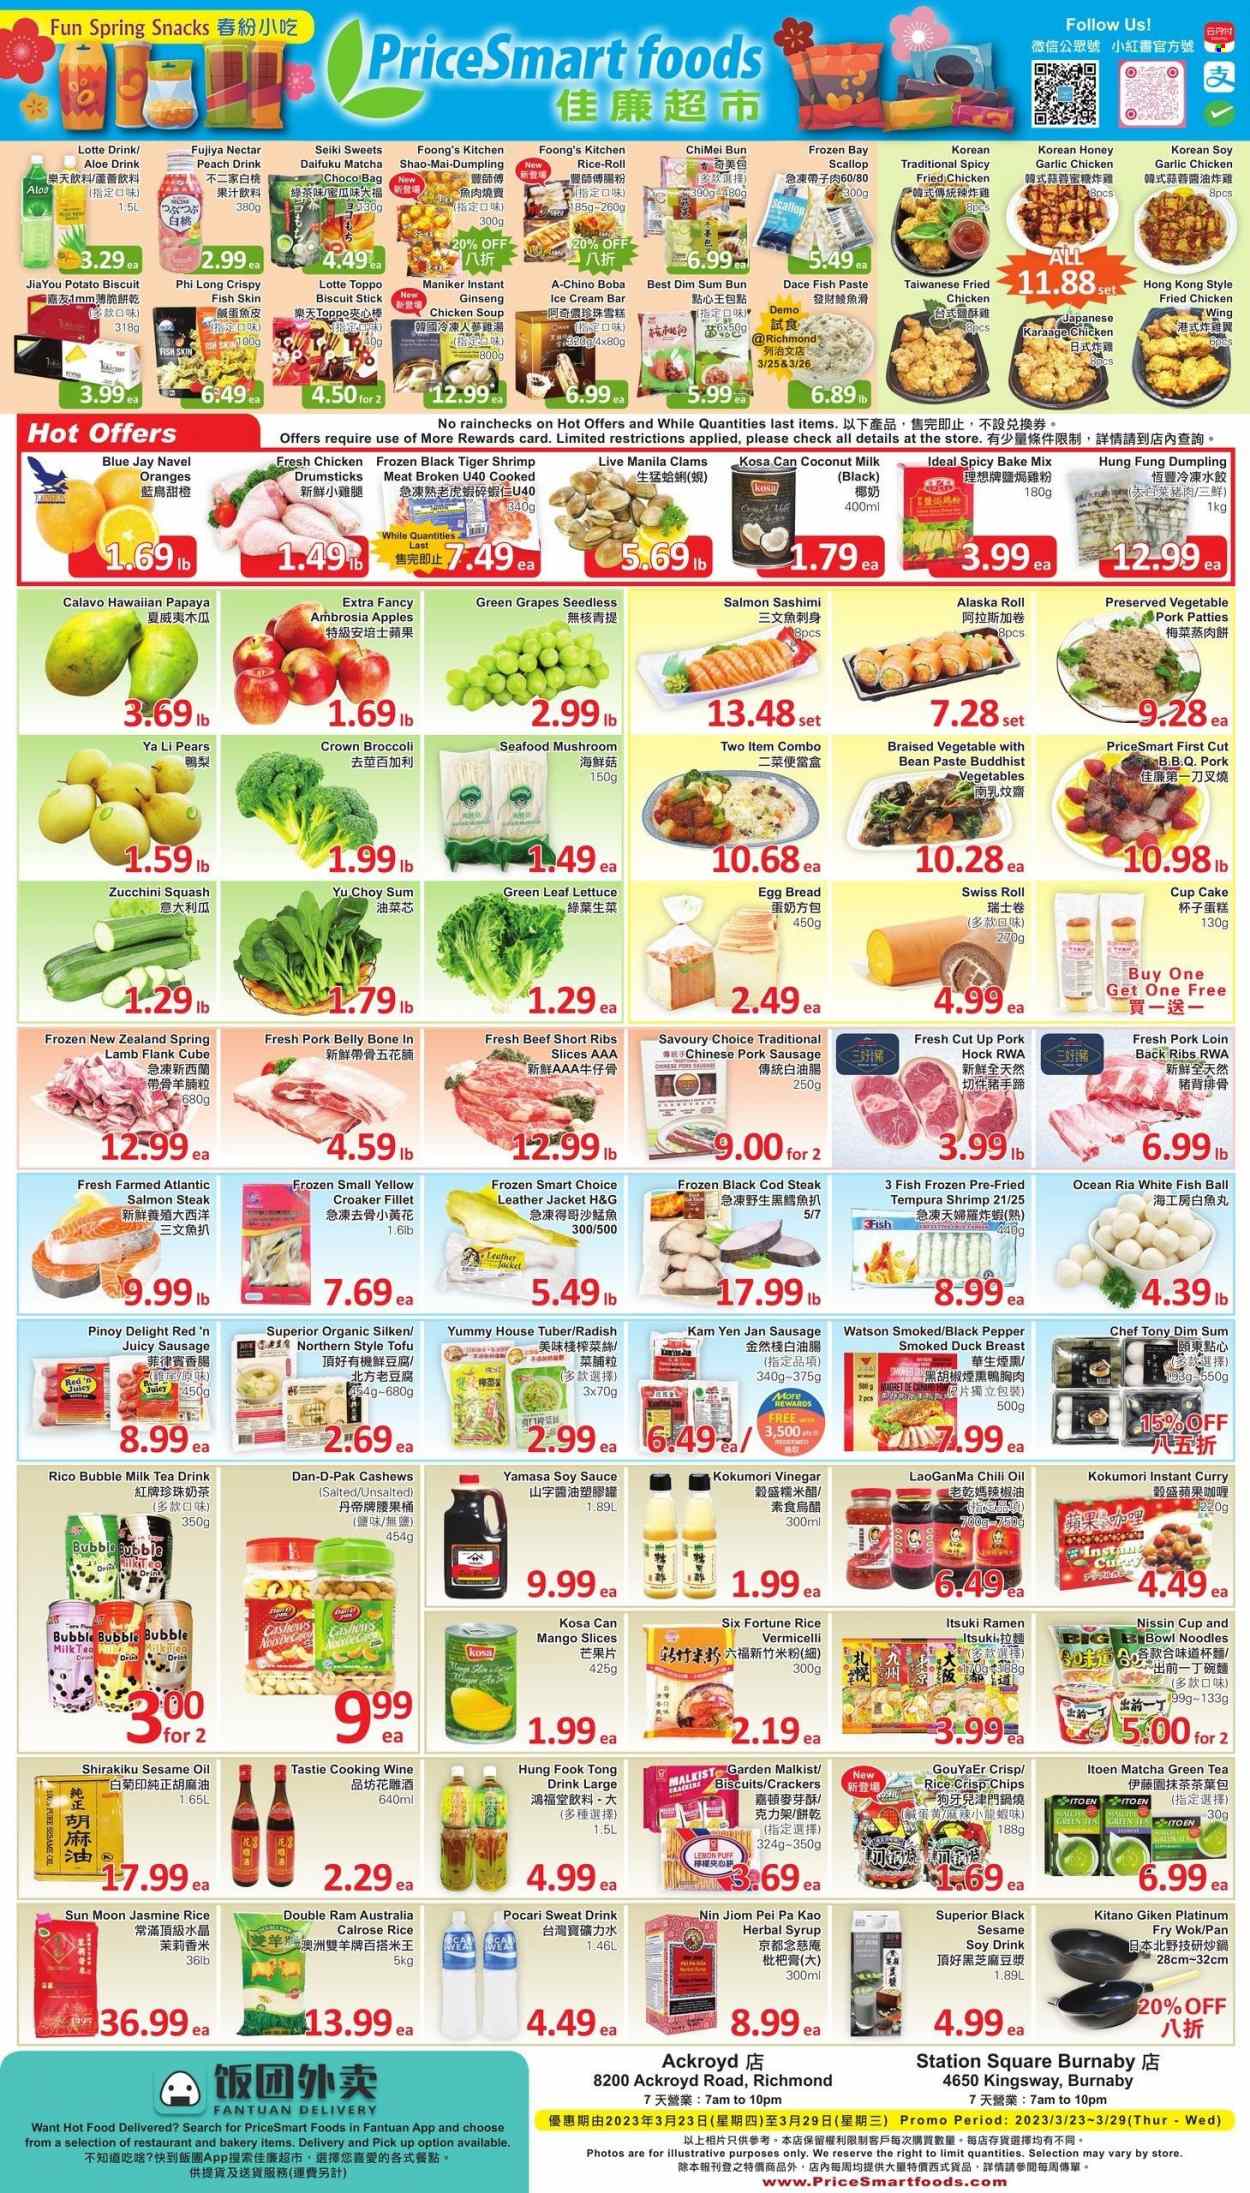 thumbnail - PriceSmart Foods Flyer - March 23, 2023 - March 29, 2023 - Sales products - mushrooms, bread, cupcake, swiss roll, broccoli, garlic, radishes, zucchini, apples, grapes, papaya, pears, oranges, navel oranges, clams, cod, scallops, whitefish, seafood, shrimps, ramen, chicken soup, smoked duck, soup, sauce, dumplings, noodles, Nissin, sausage, pork sausage, tofu, eggs, ice cream, snack, crackers, biscuit, coconut milk, jasmine rice, rice vermicelli, black pepper, soy sauce, sesame oil, Laoganma, honey, syrup, cashews, green tea, matcha, tea, cooking wine, duck meat, duck breasts, beef ribs, steak, ribs, pork belly, pork hock, pork loin, pork meat, bin, pan, wok, cup, pin, ginseng. Page 1.